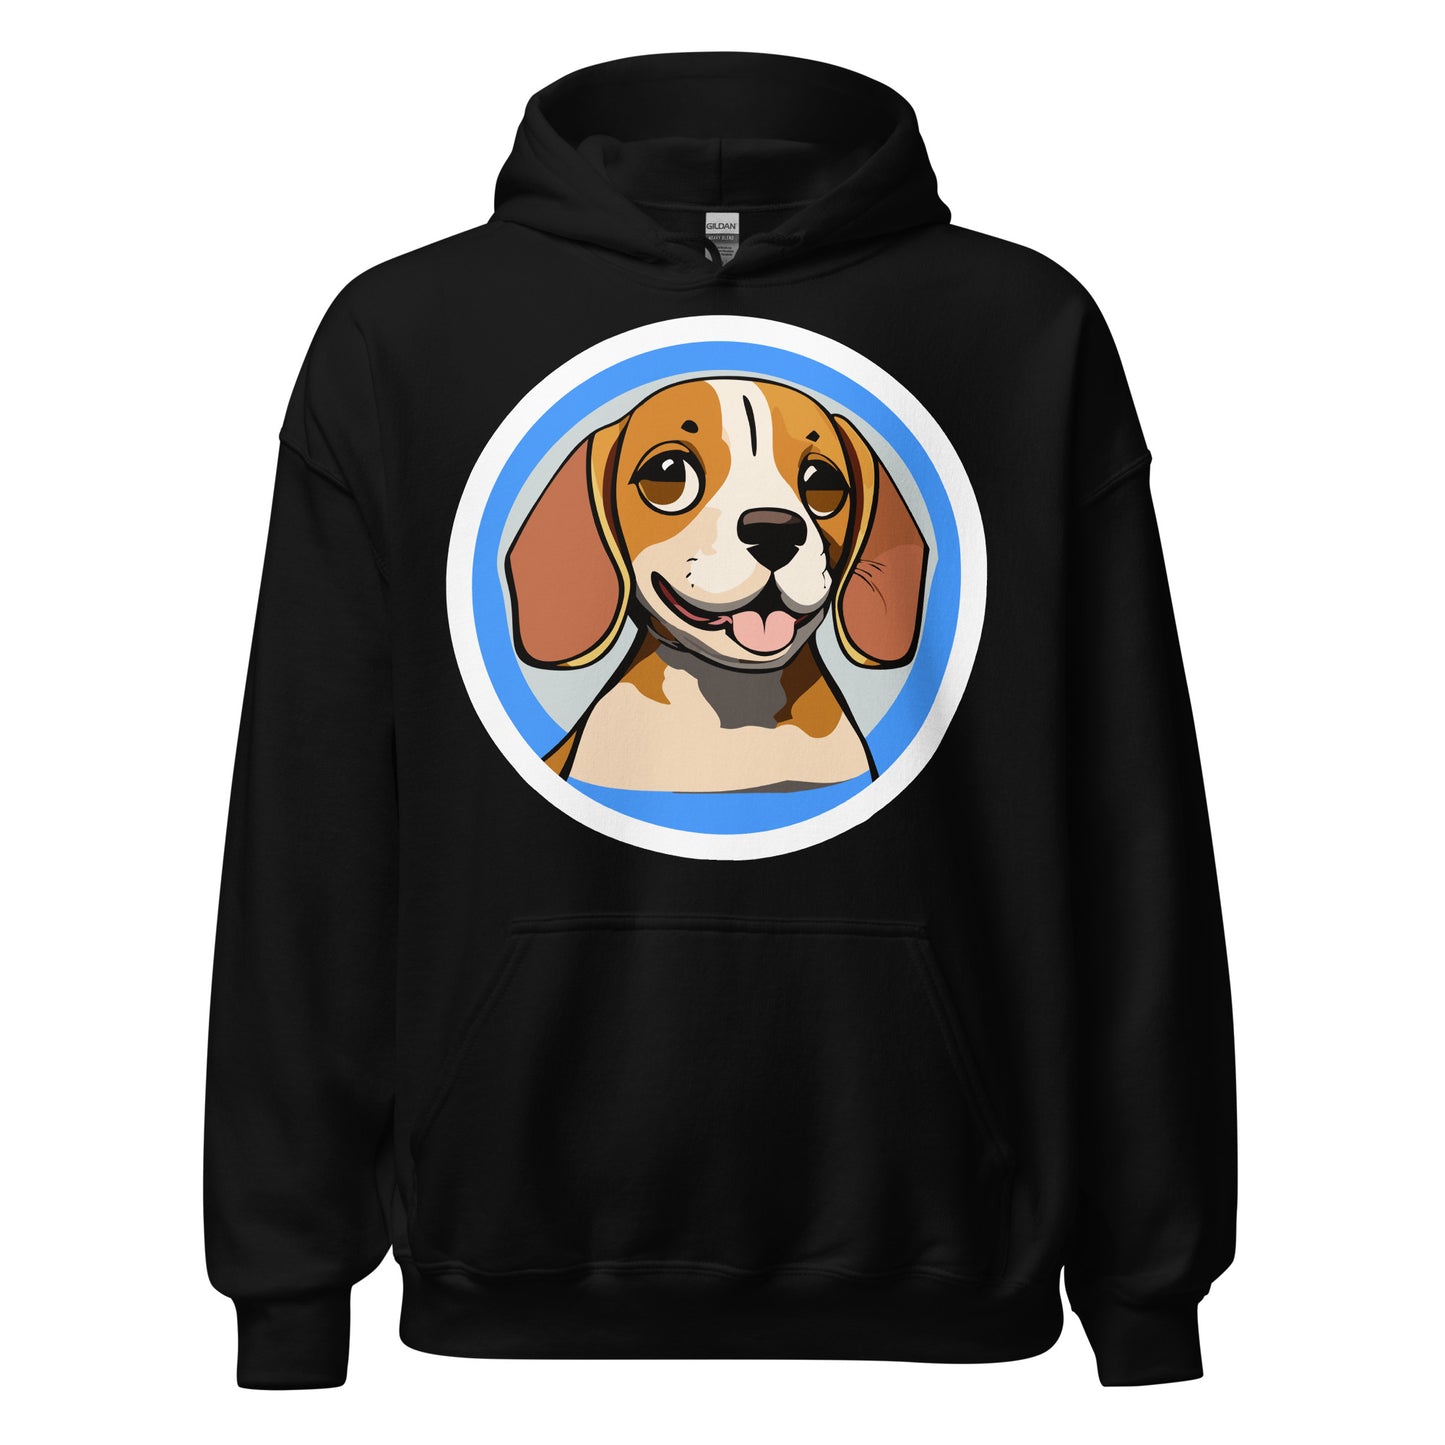 Comfy unisex hoodie for him or her with a cute beagle image, in black